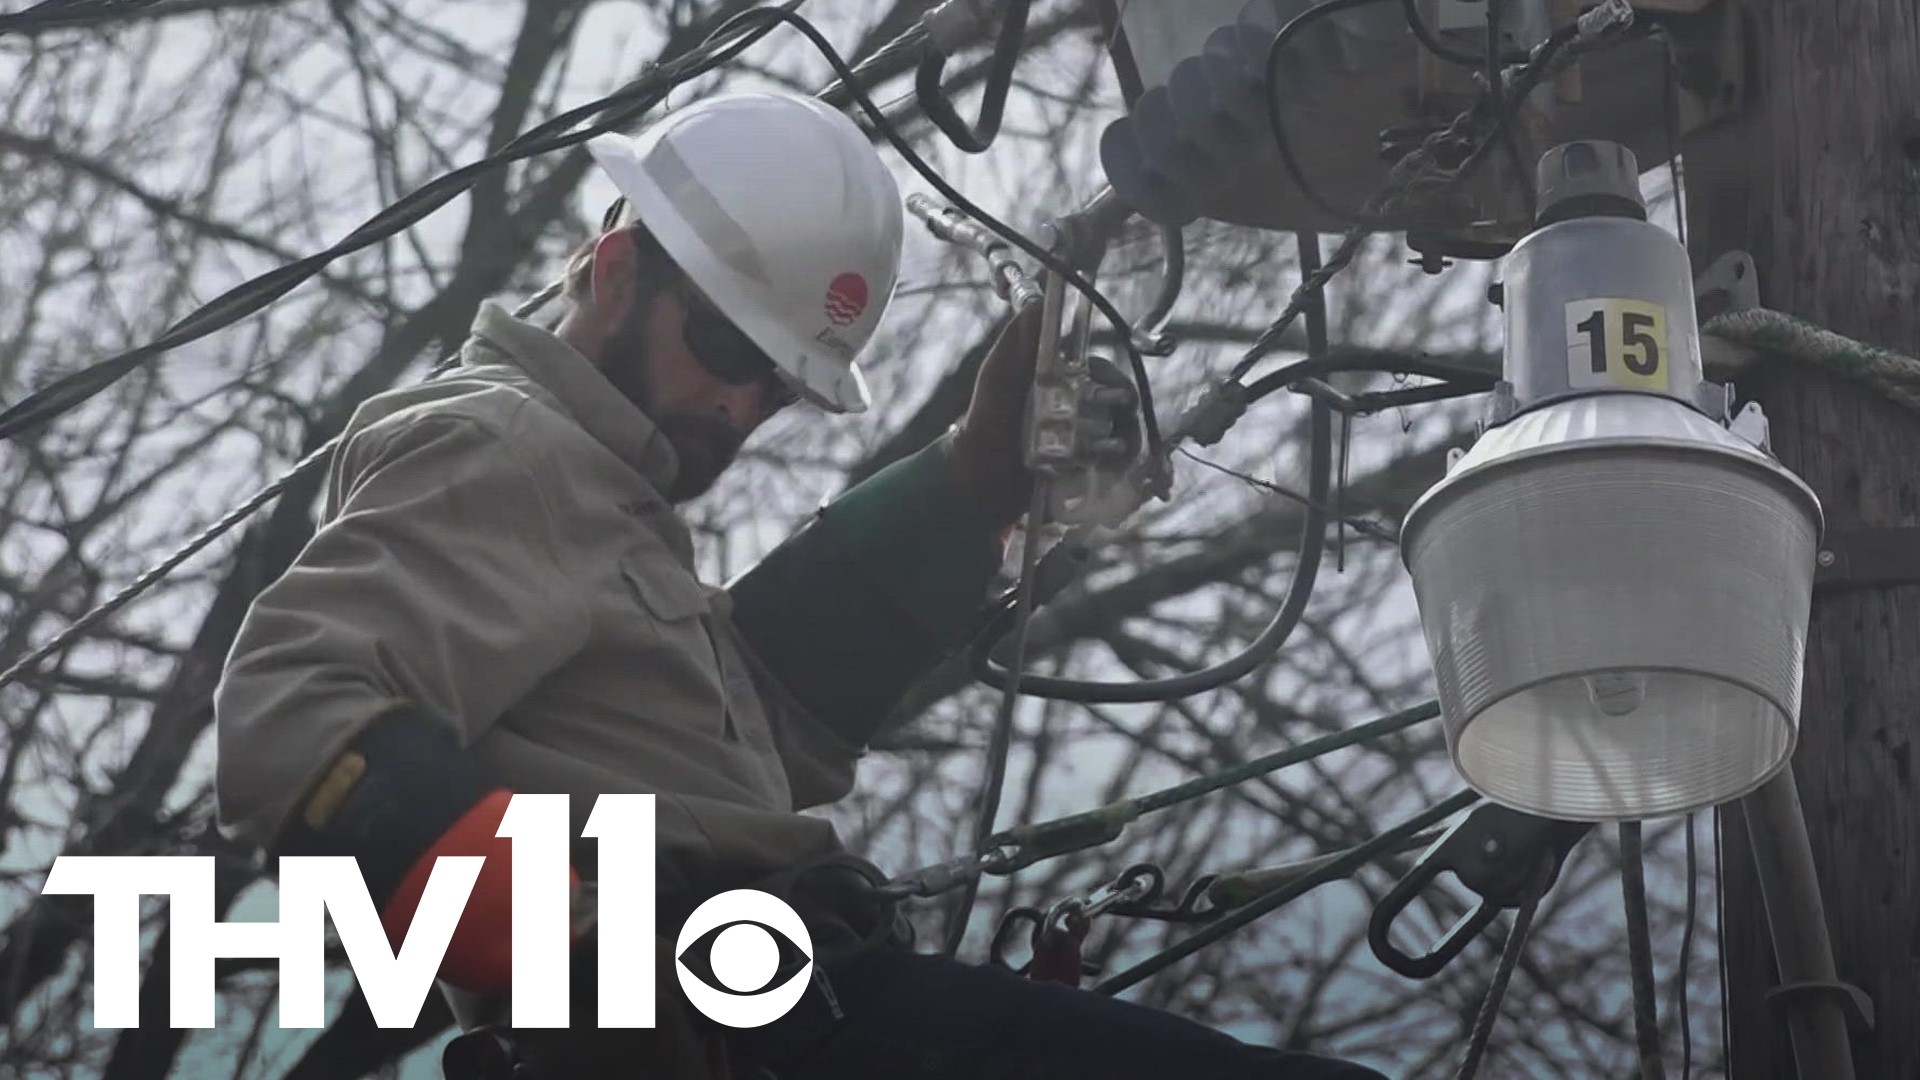 While the winter weather may be over, the aftermath is not. There are still thousands of Arkansans across the state that haven't had their power restored.